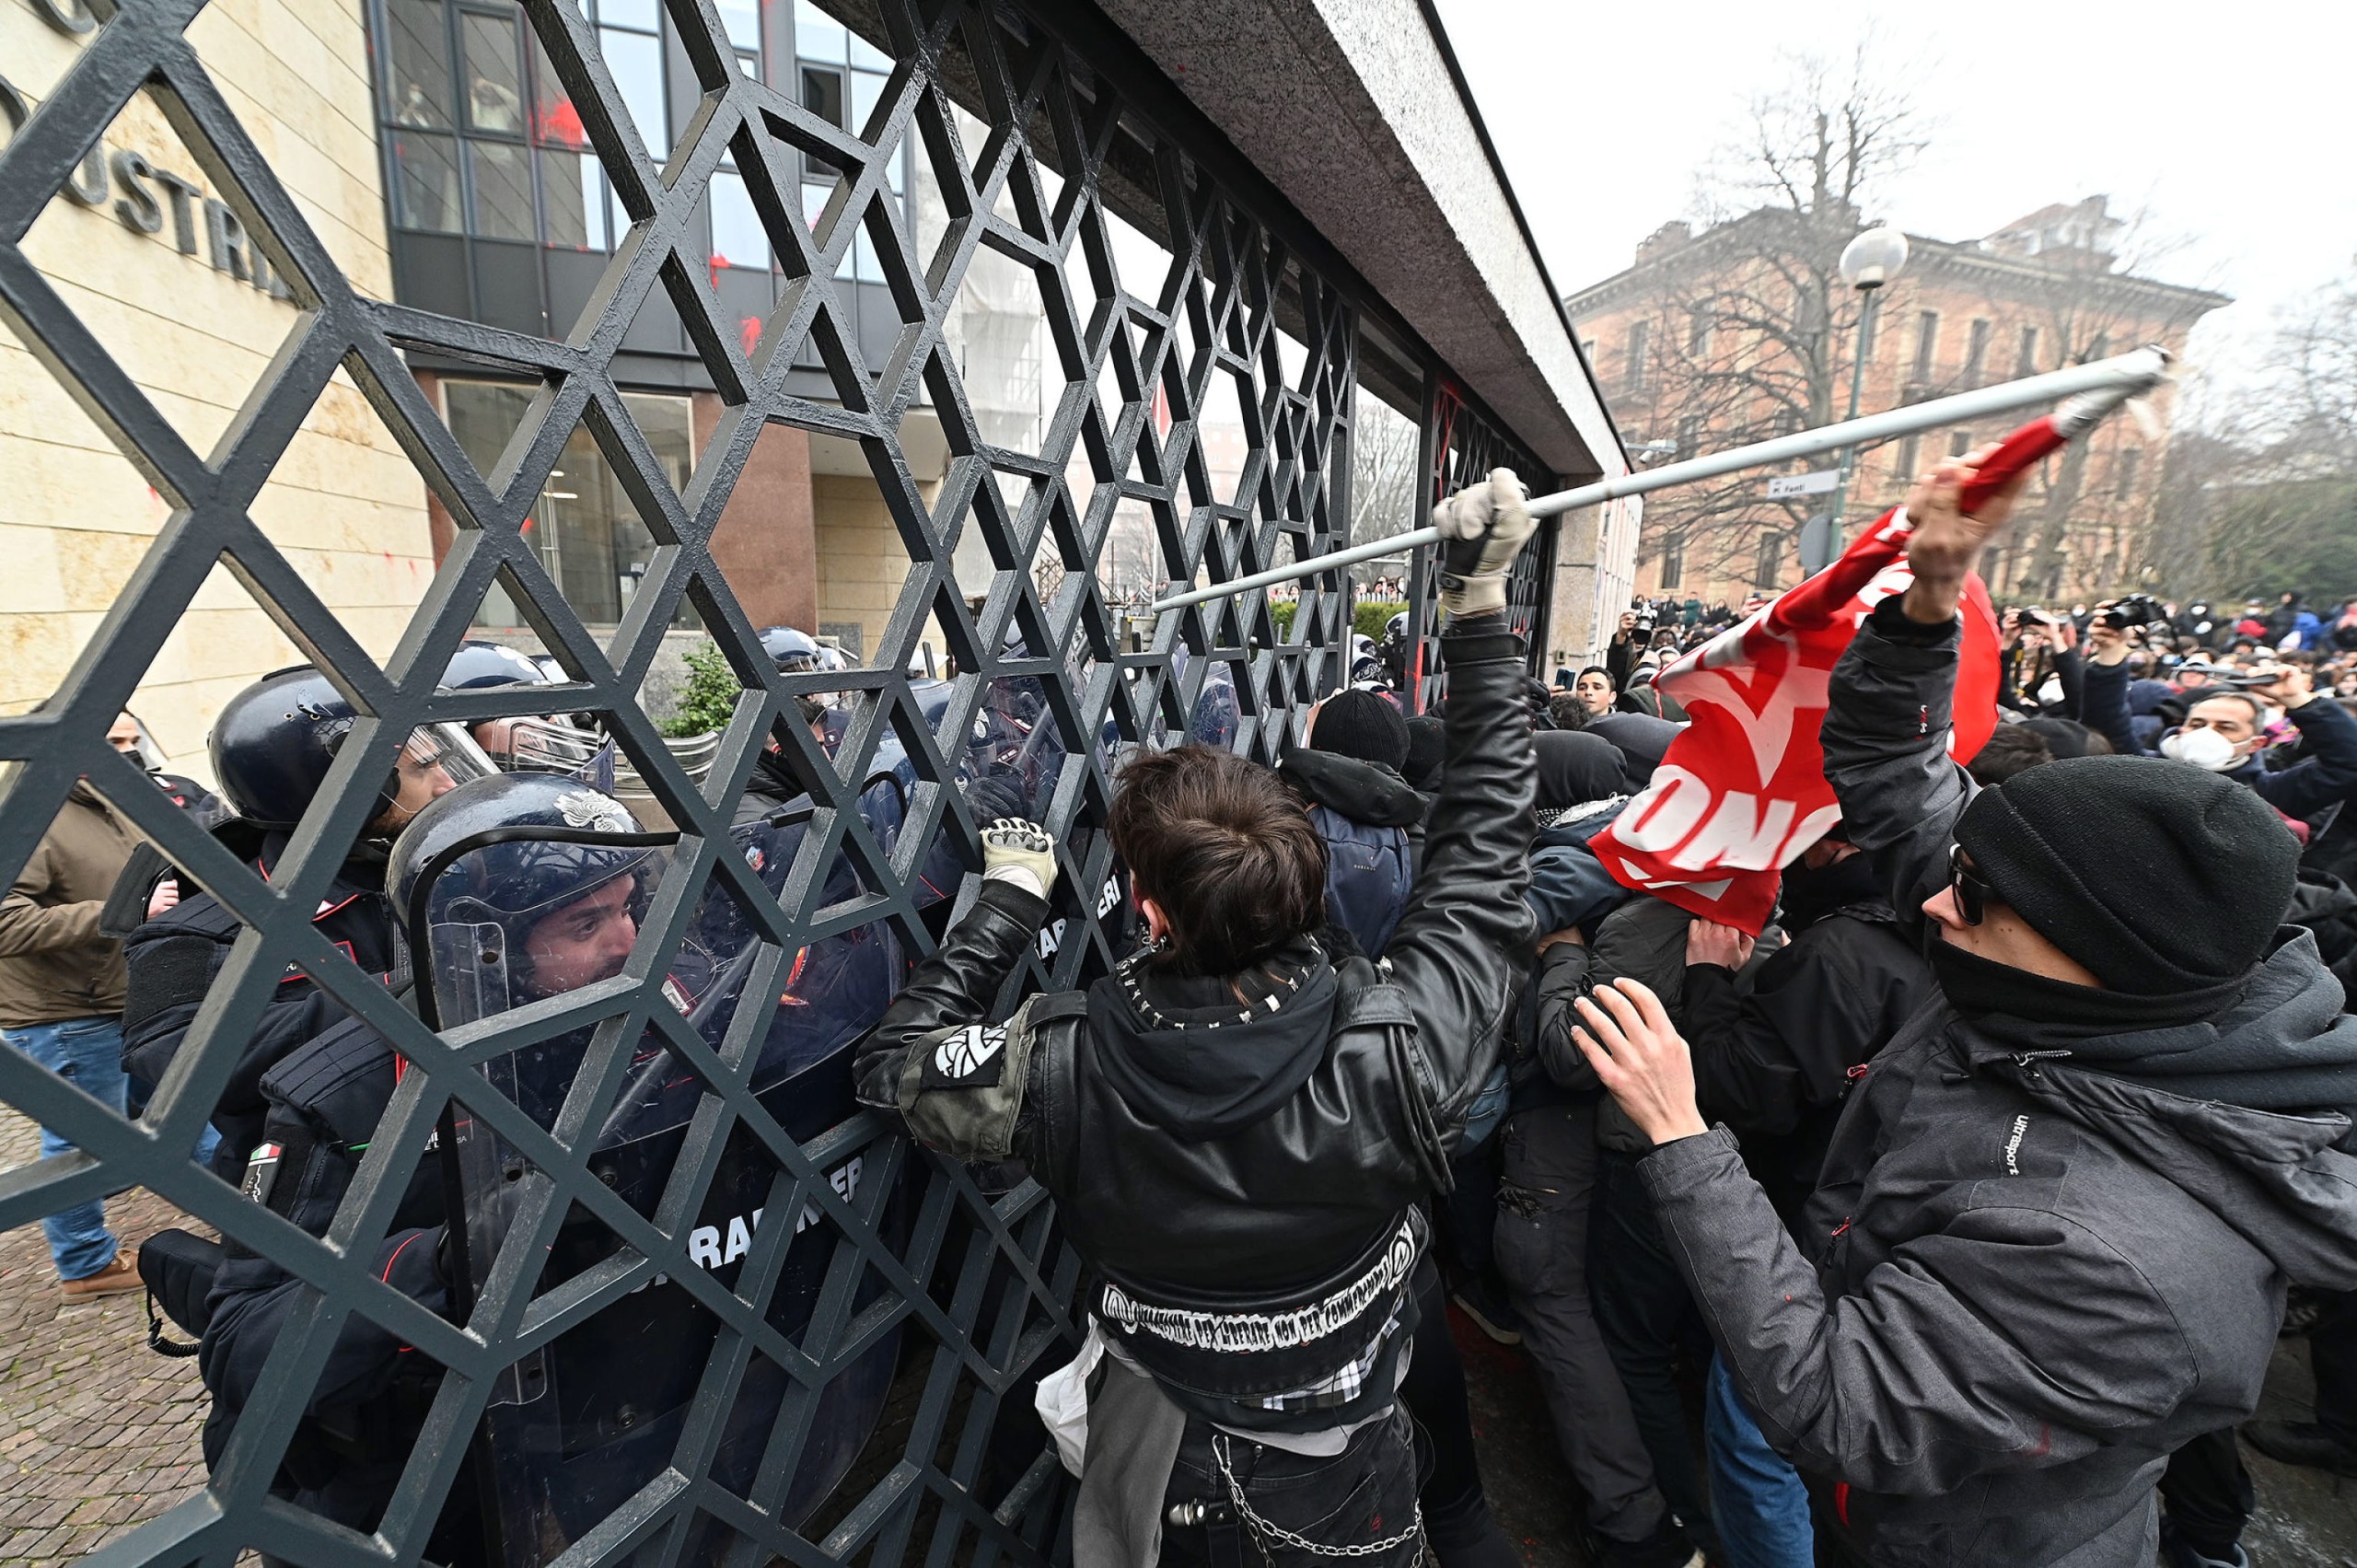 epa09769121 Students try to break into the headquarters of Confindustria (The General Confederation of Italian Industry) during a protest in Turin, Italy, 18 February 2022. Students took to the streets in around 40 Italian cities to protest after two teenagers died in two separate incidents while on training internships. At least seven officers were hurt during clashes with students in Turin.  EPA/Alessandro Di Marco